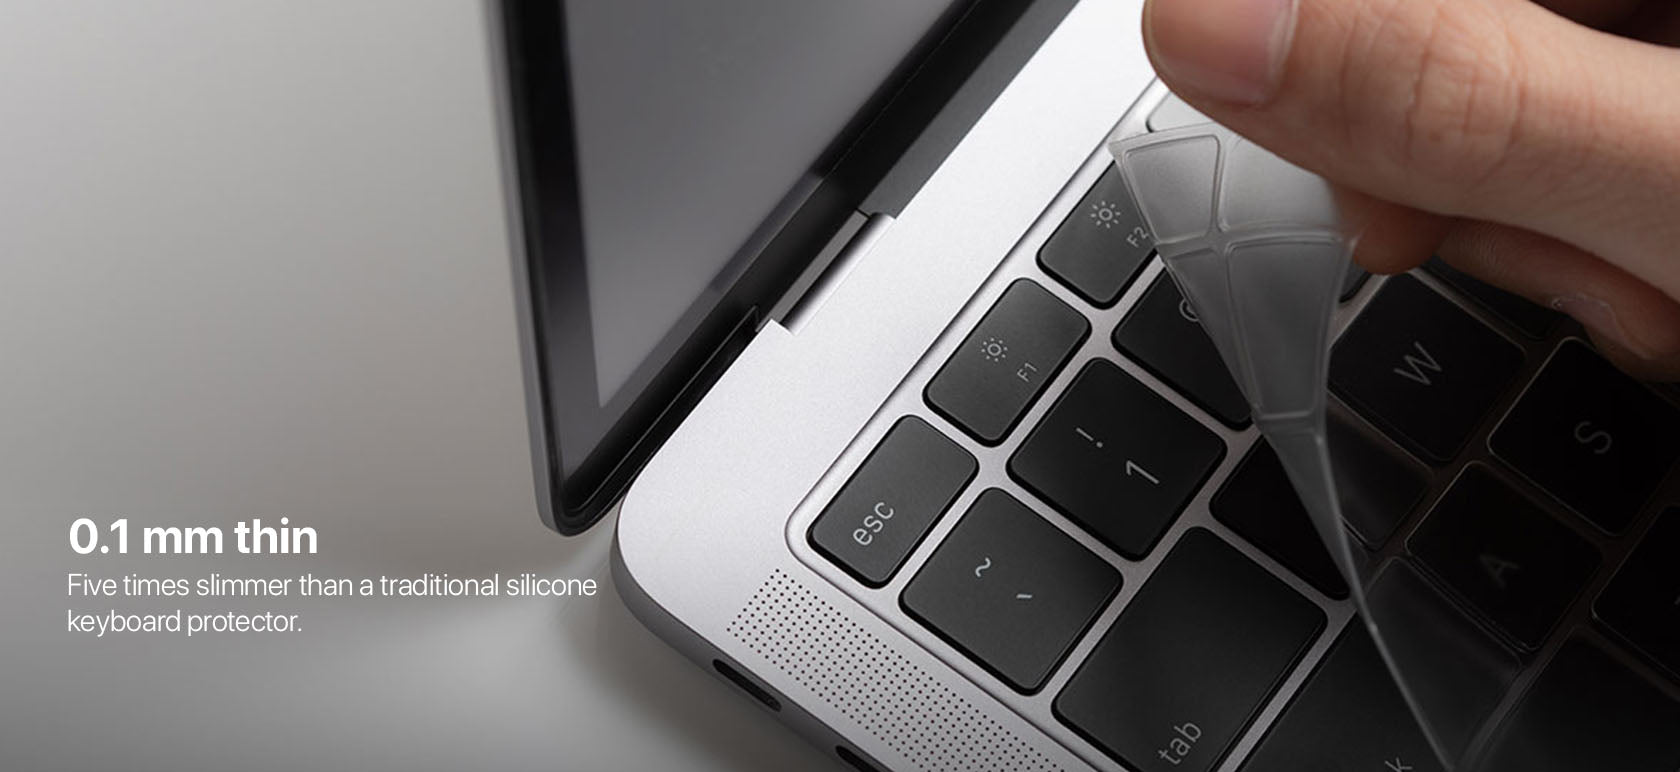 0.1 mm thin Five times slimmer than a traditional silicone keyboard protector.